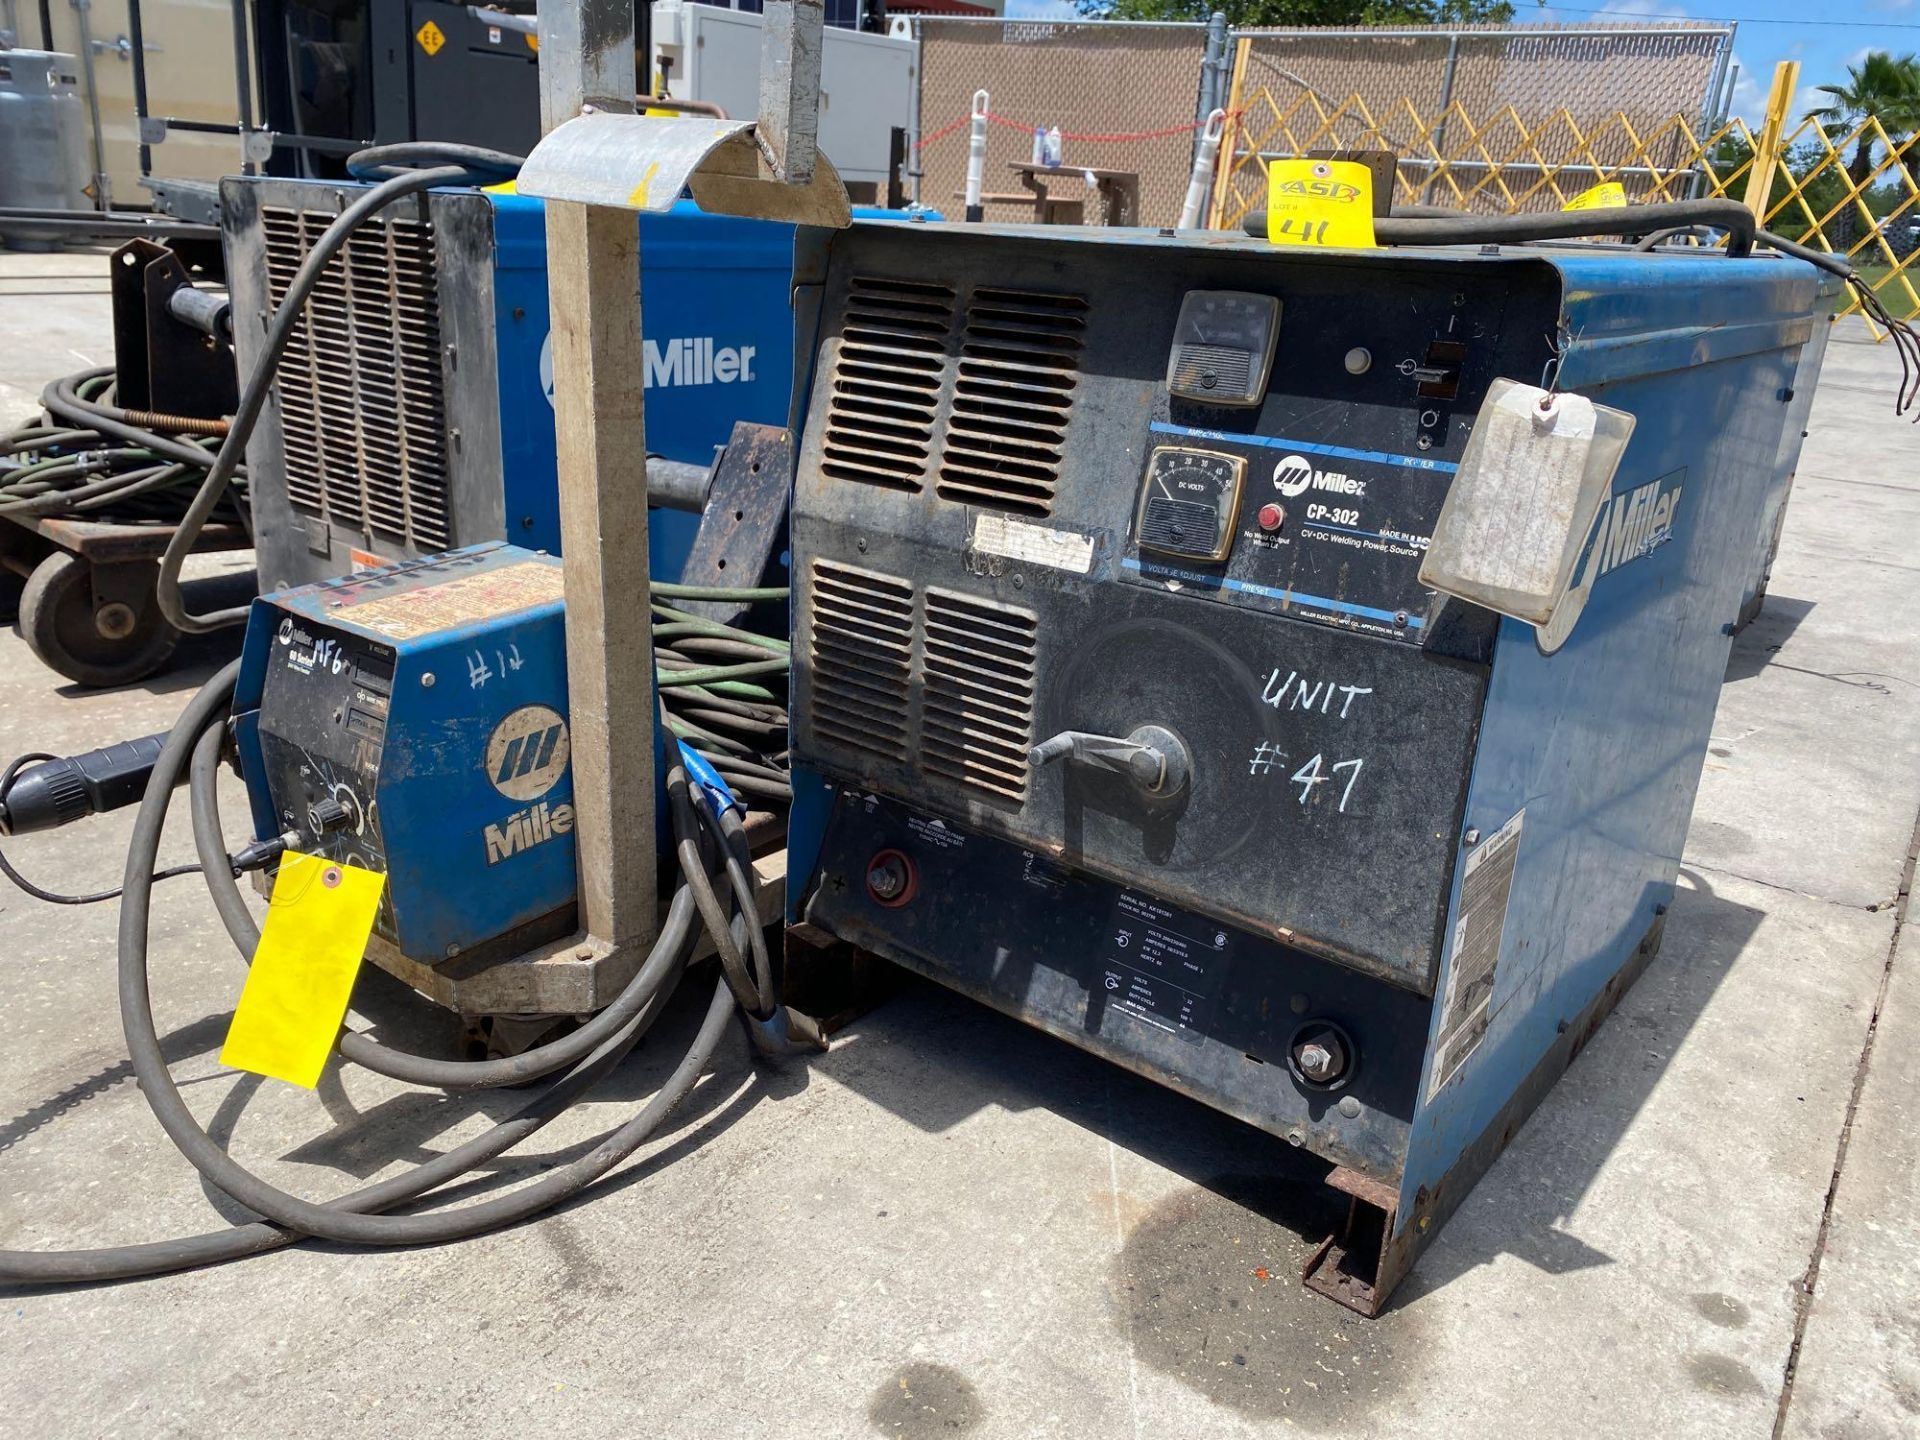 MILLER CP-302 ELECTRIC WELDER WITH MILLER 60 SERIES 24V WIRE FEEDER AND CABLES/CORDS